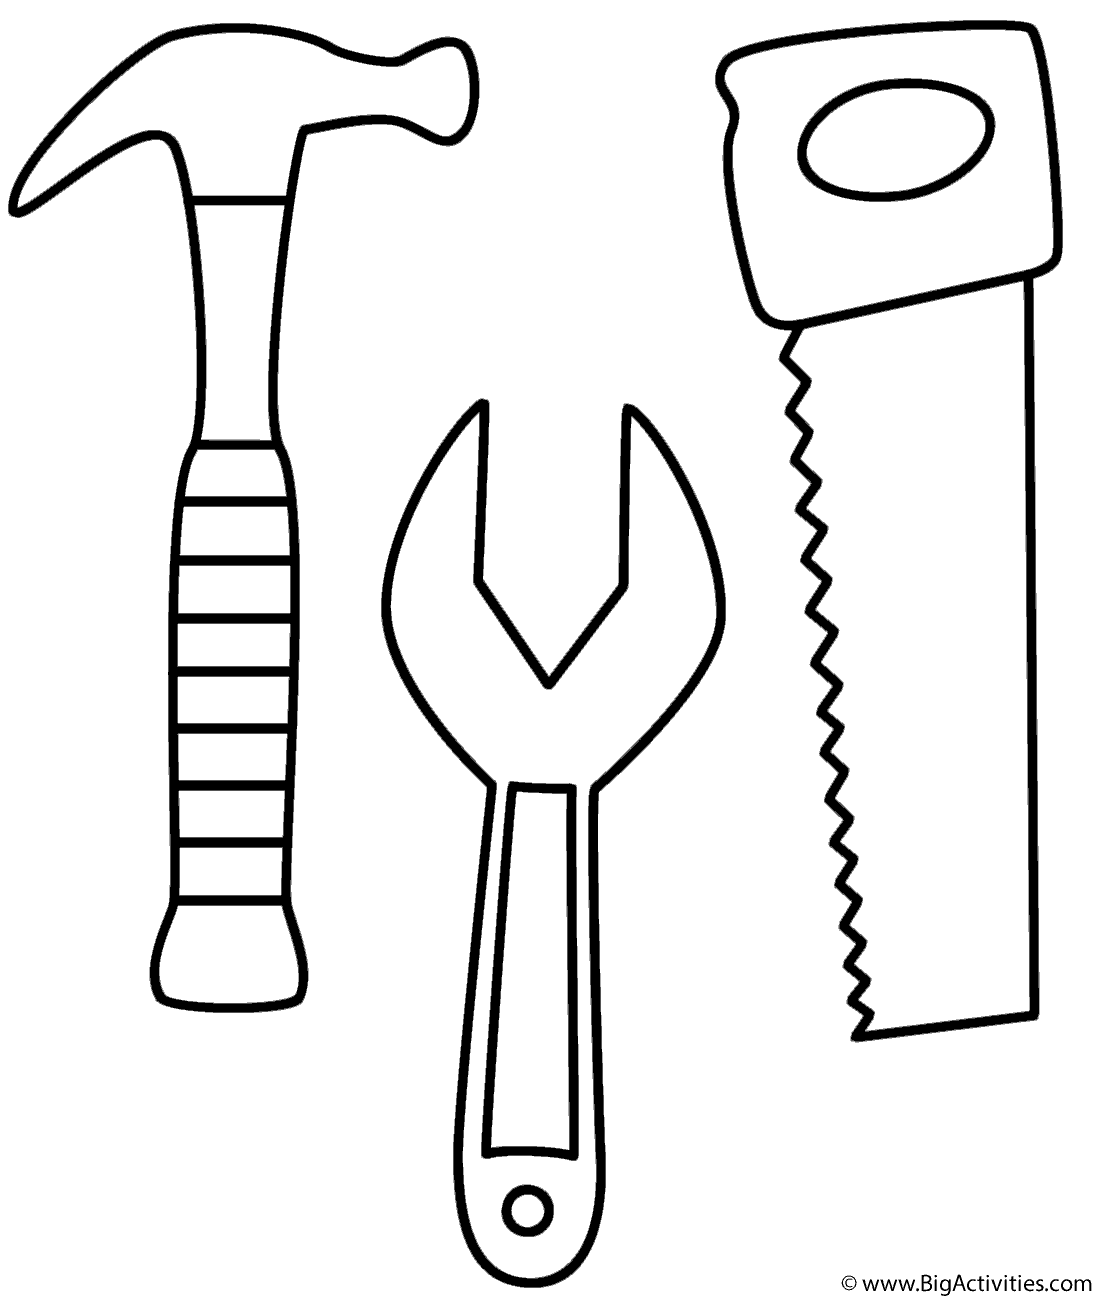 https://www.bigactivities.com/coloring/tools/hammers/images/hammer_saw_wrench.png